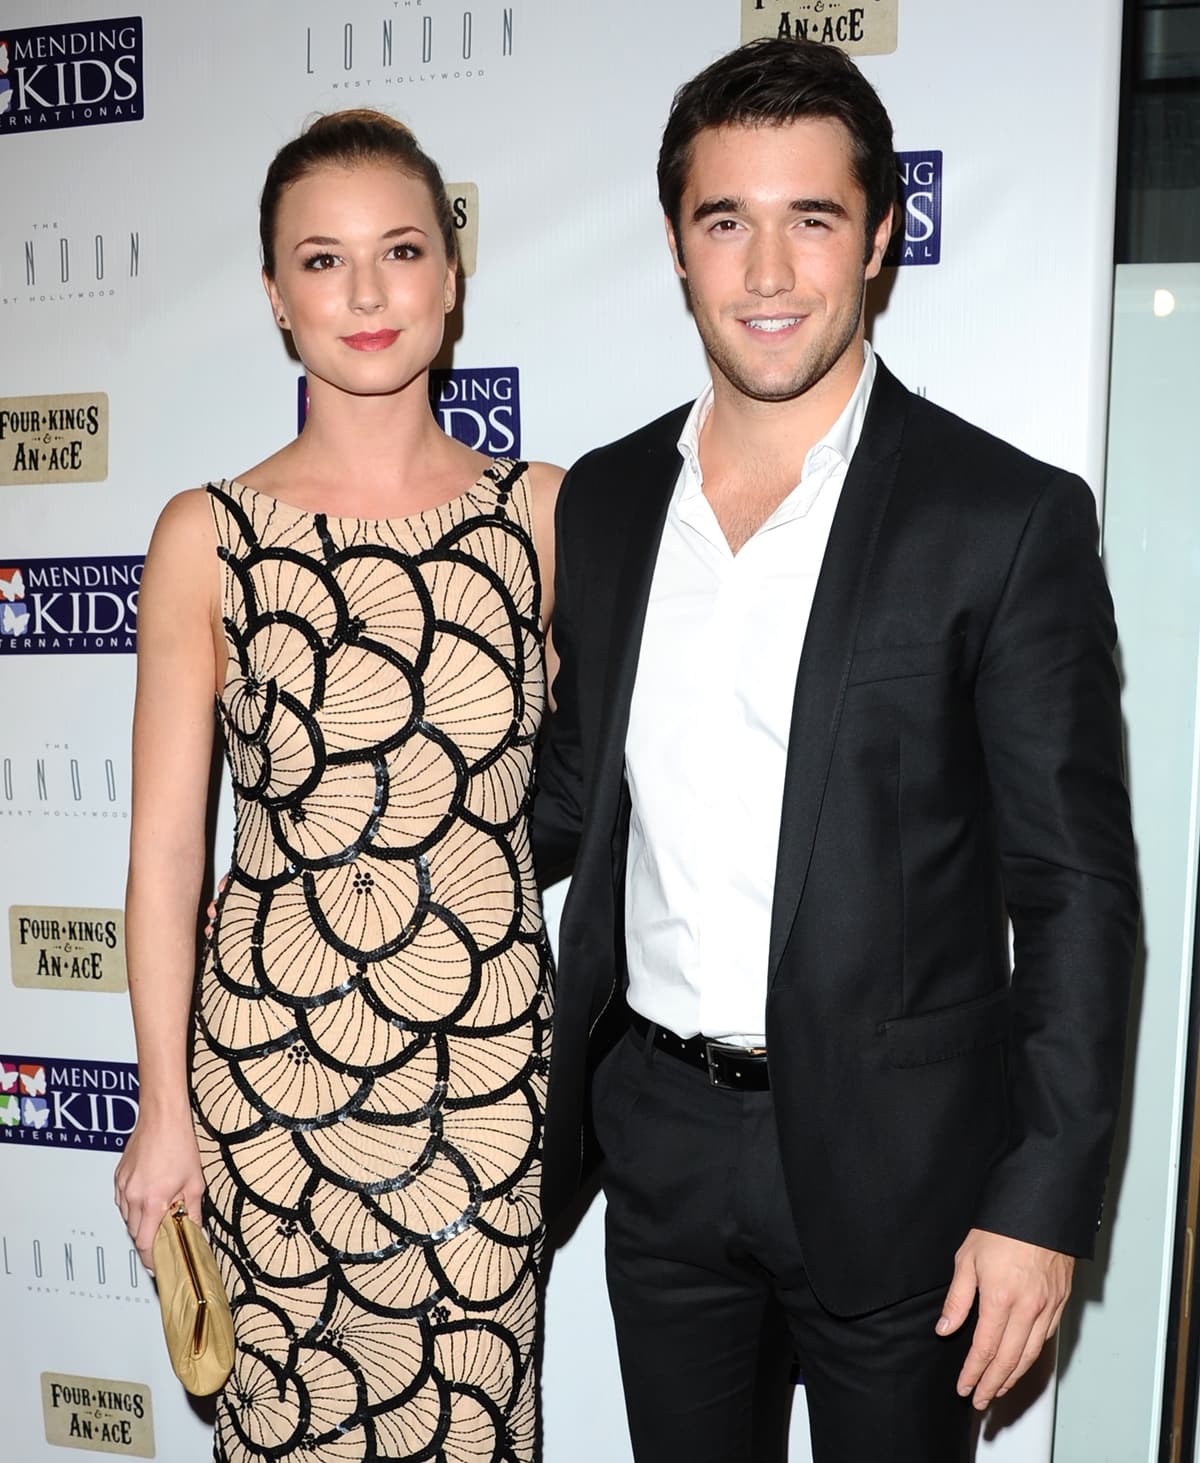 Emily VanCamp and Joshua Bowman met in 2011 on the set of Revenge and married in 2018